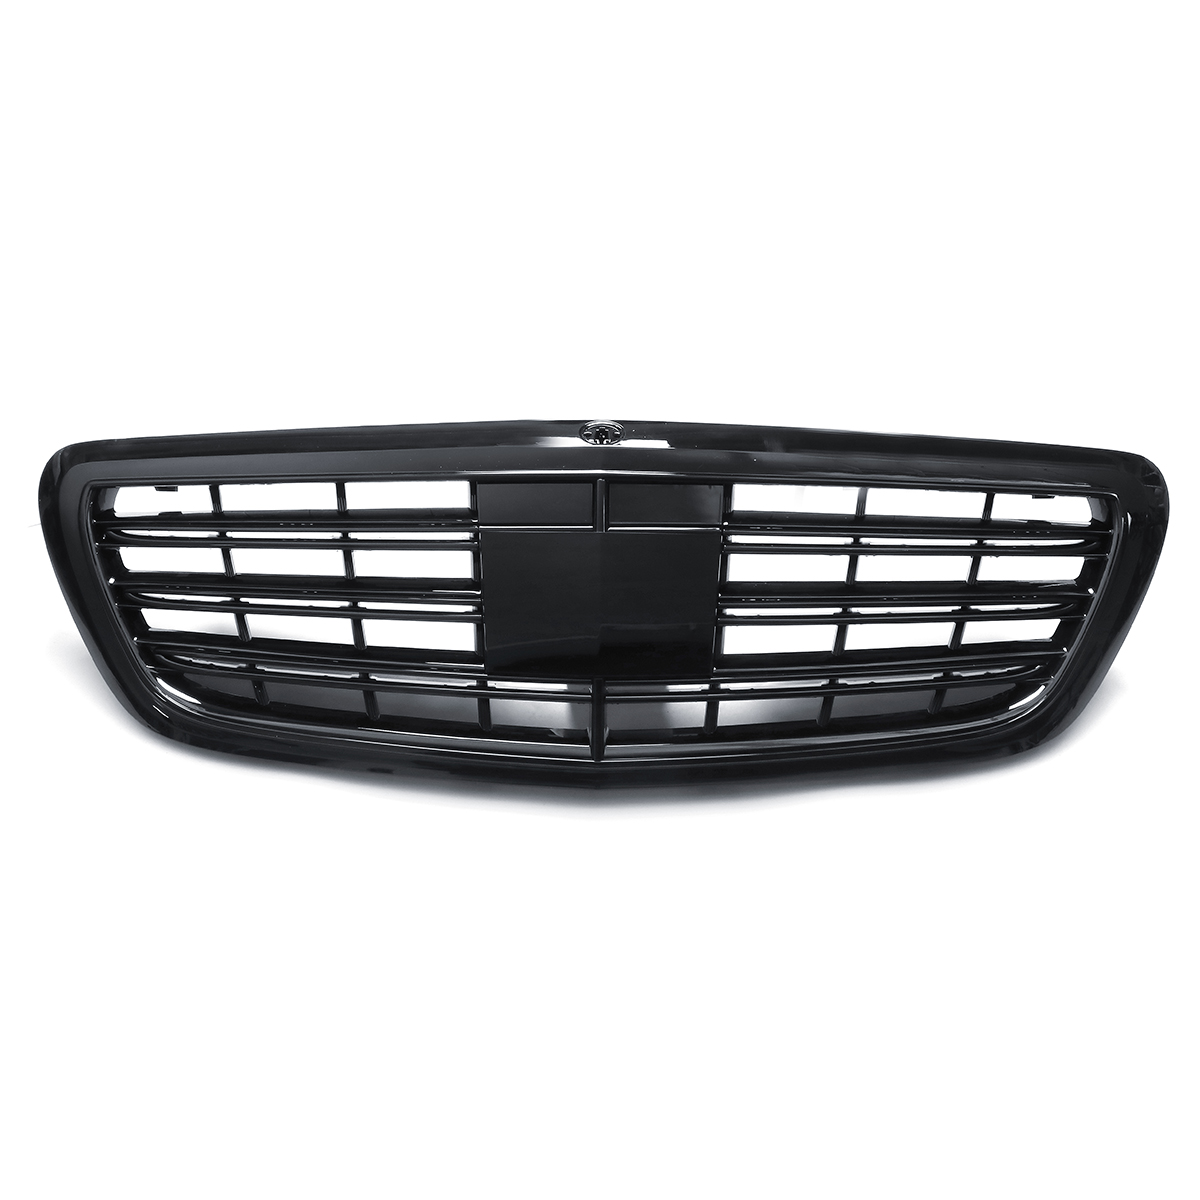 

Gloss Black Front Mesh Grille for AMG S-CLASS S65 S63 2014-2017 W222 S300 S400